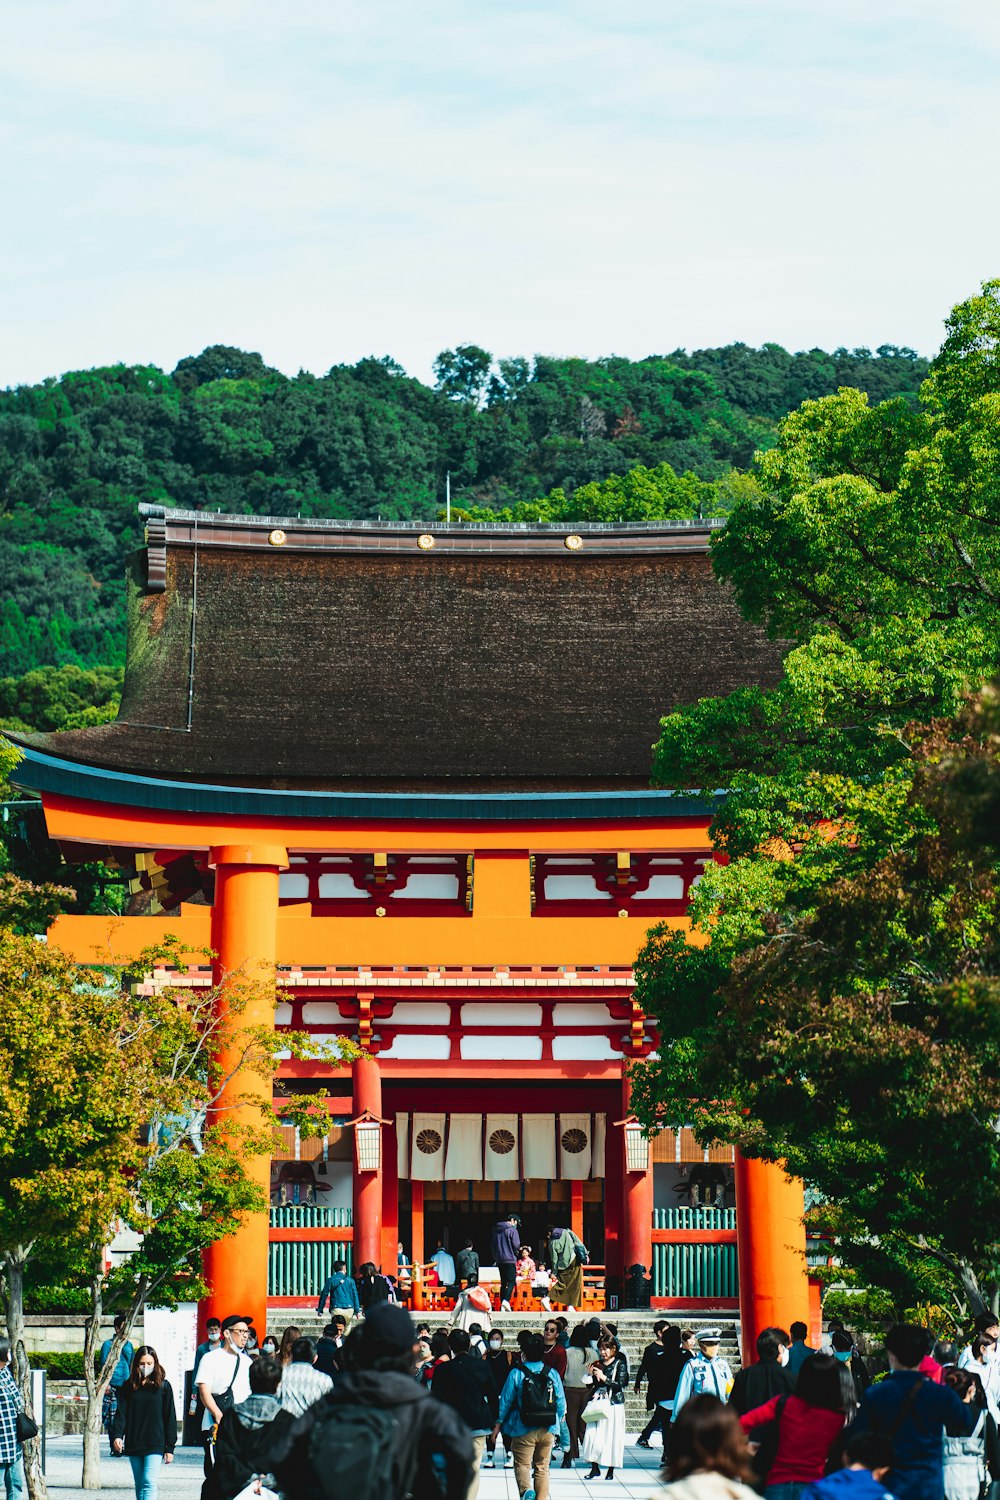 brown and black pagoda temple surrounded by green trees during daytime